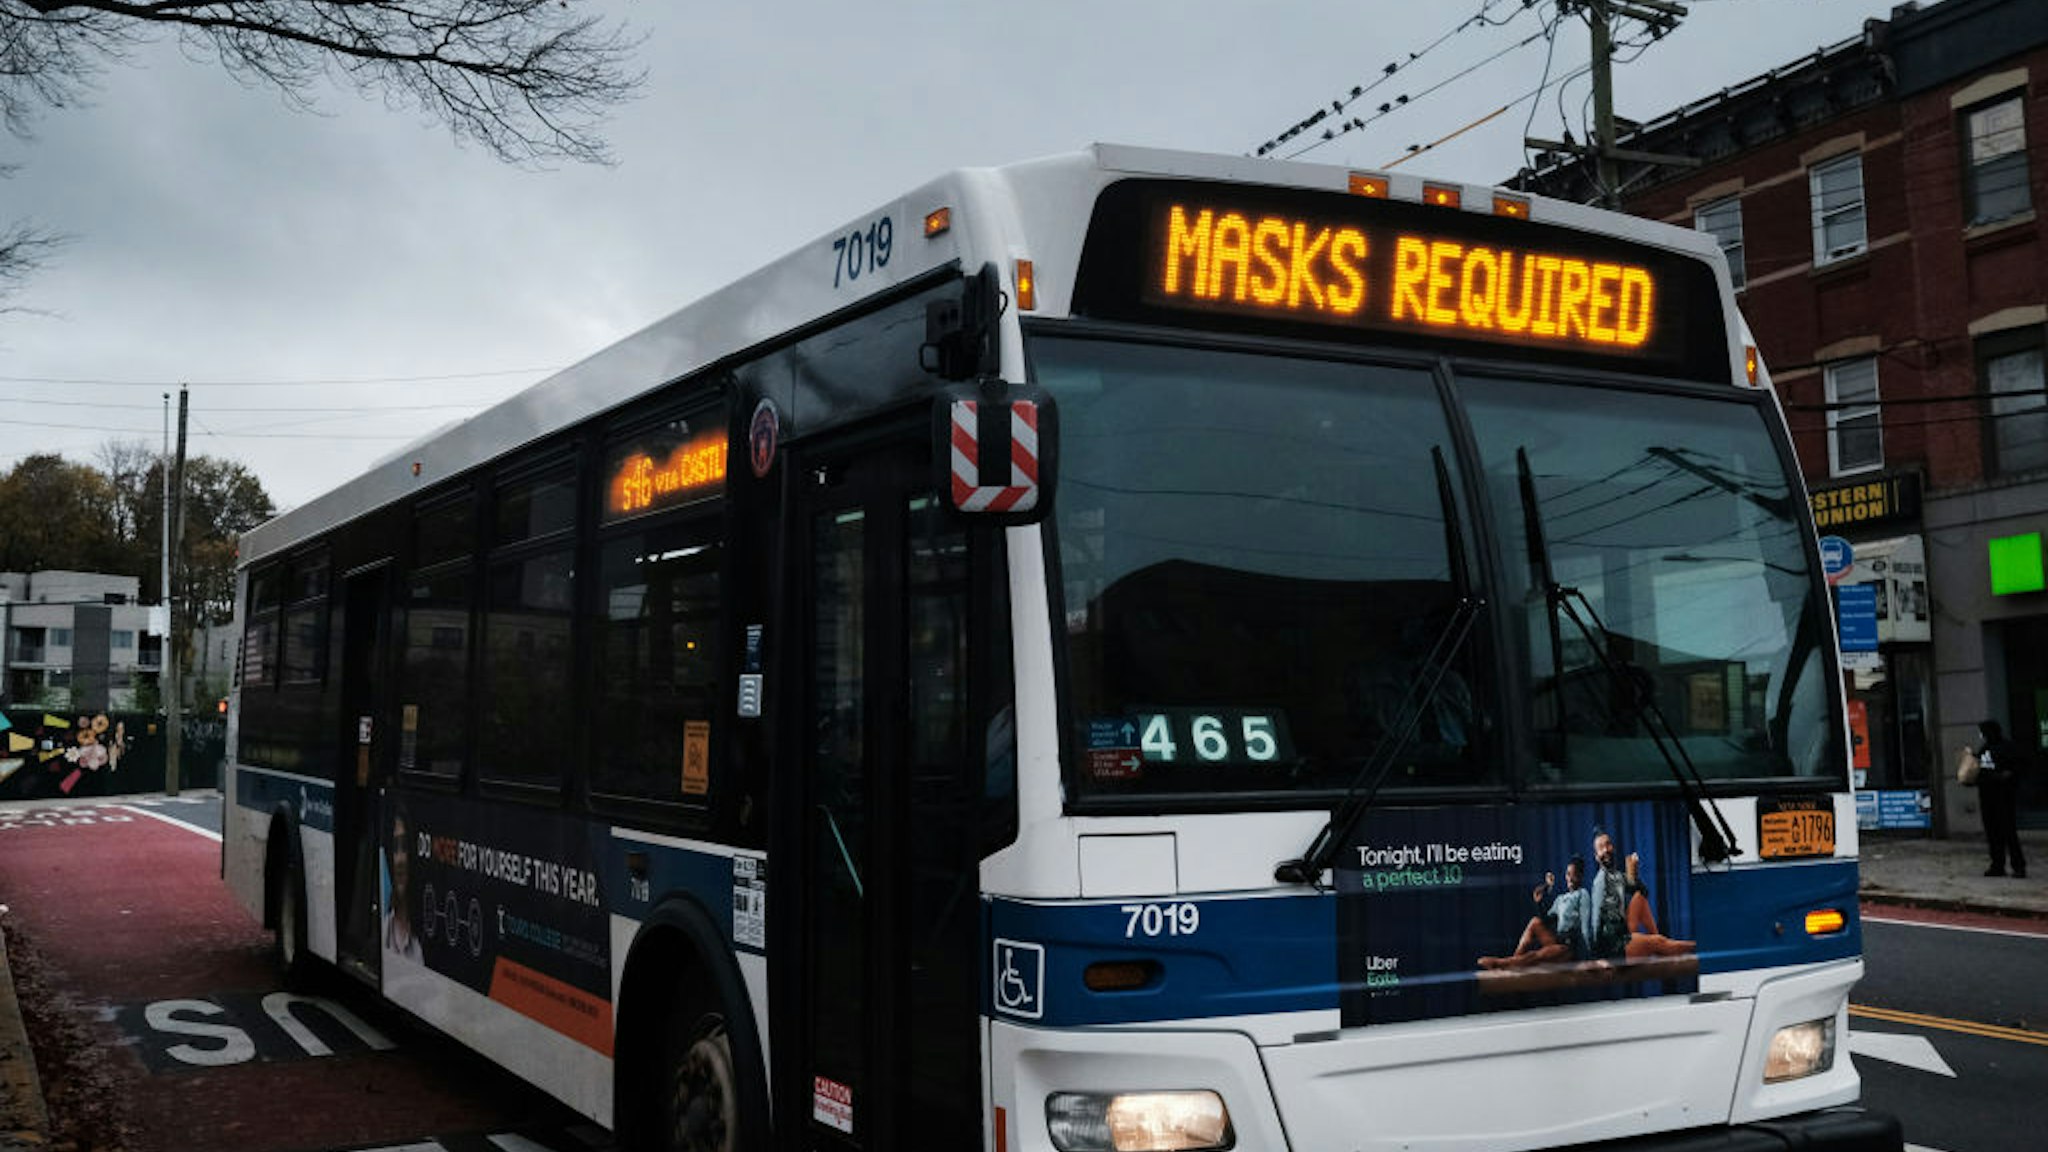 NEW YORK, NEW YORK - NOVEMBER 12: A bus displays a message noting masks are required to board on November 12, 2020 in the in Staten Island borough of New York City. Staten Island's seven-day positive test rate for Covid-19 is the highest in the city. Two Staten Island ZIP codes have now risen above the five percent infection rate, prompting Gov. Andrew Cuomo to declare the borough a "yellow zone," which includes limits on outdoor gatherings to 25 people and attendance at churches to 50 percent capacity.